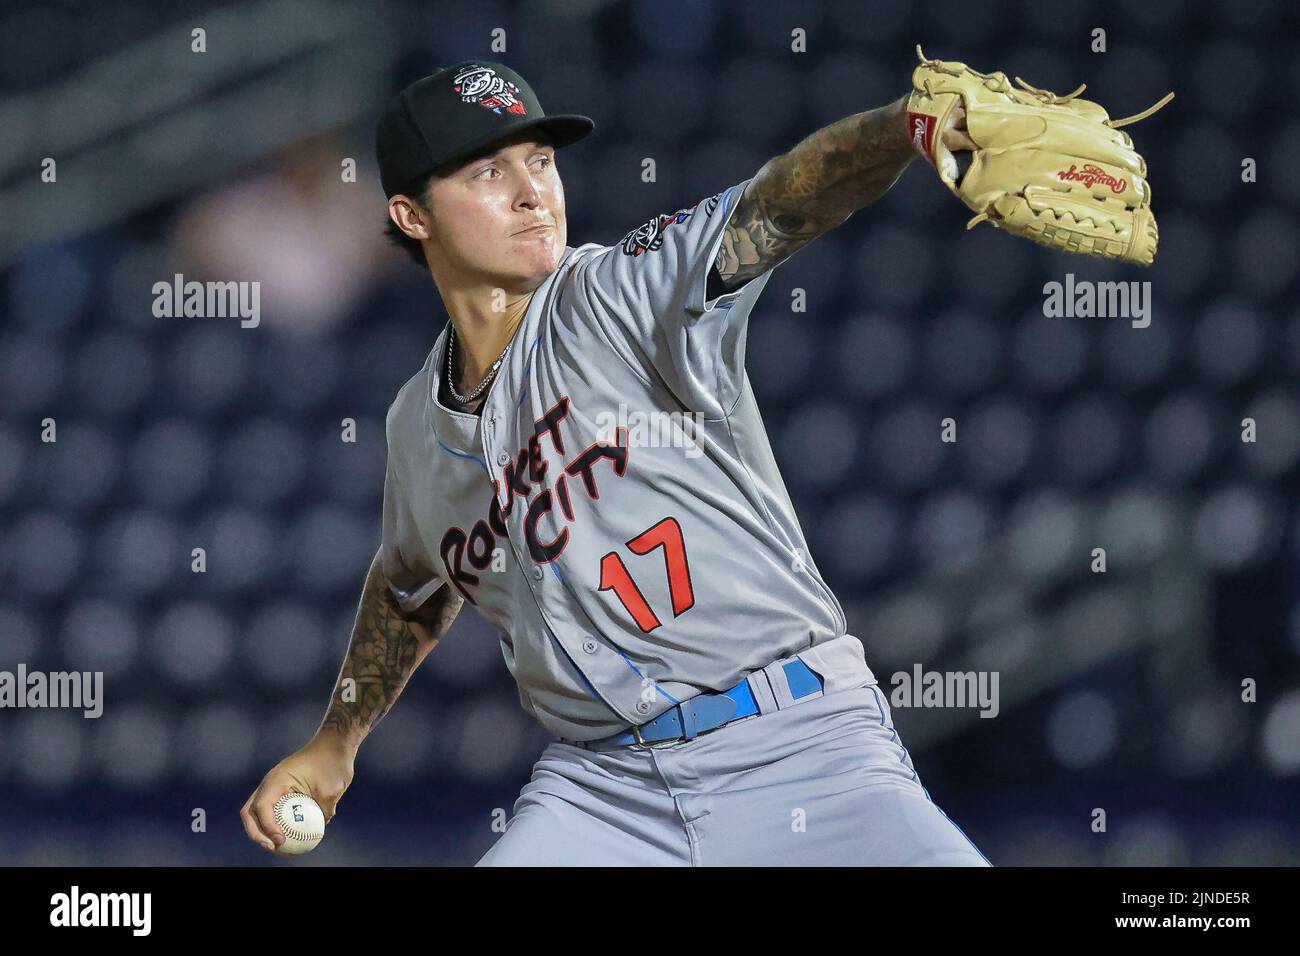 August 10, 2022: Rocket City Trash Pandas pitcher Aaron Hernandez (17) pitches during an MiLB game between the Biloxi Shuckers and Rocket City Trash Pandas at MGM Park in Biloxi, Mississippi. Bobby McDuffie/CSM Stock Photo